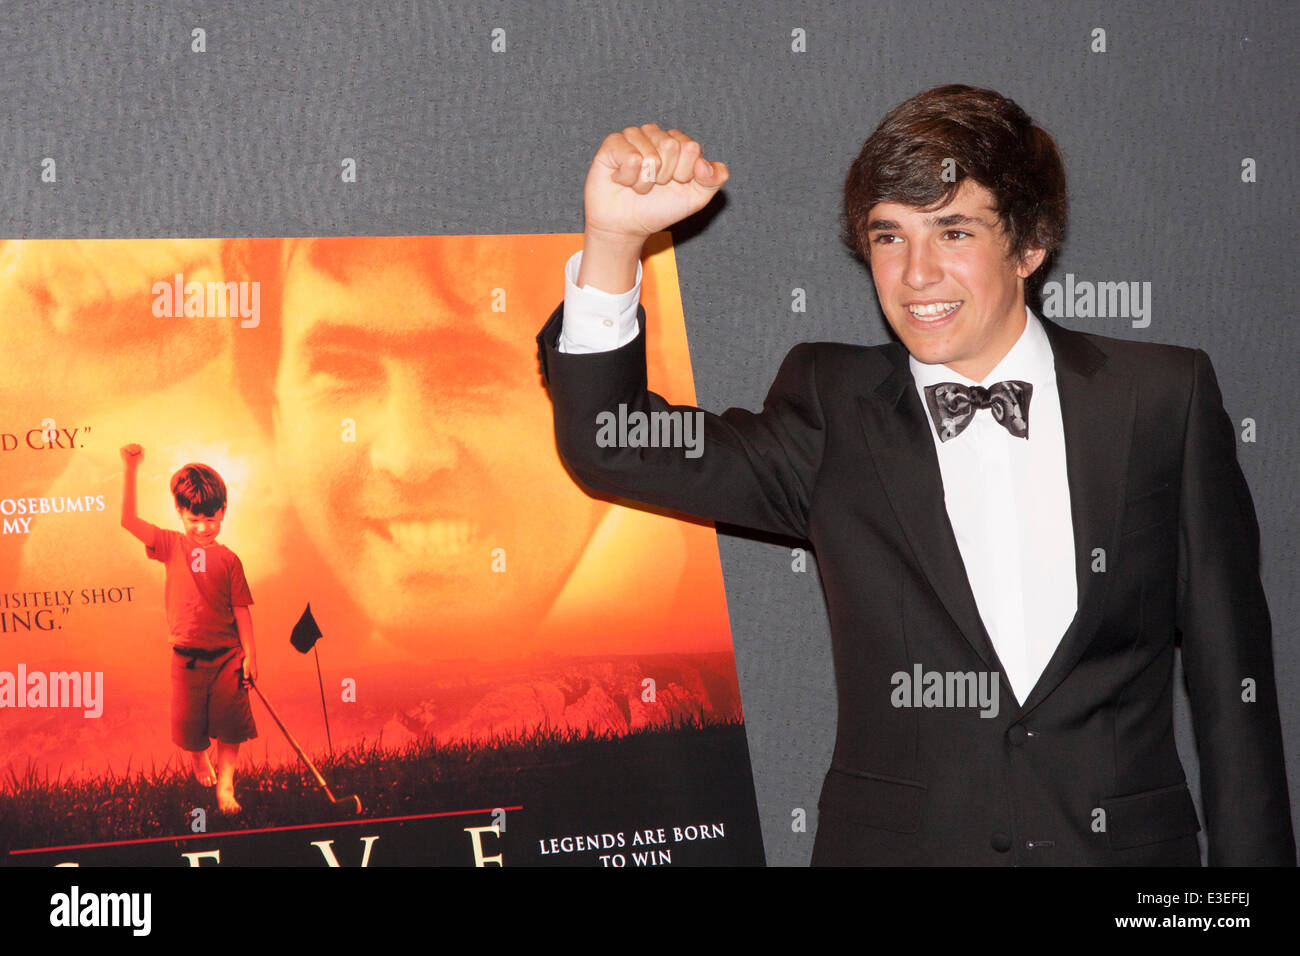 London, UK. 23rd June, 2014. Jose Luis Gutierrez Real who stars as a young Seve mimmics the film's poster at the premiere of the film Seve, a biopic of the life of the legendary Spanish golfer Seve Ballesteros. Stock Photo